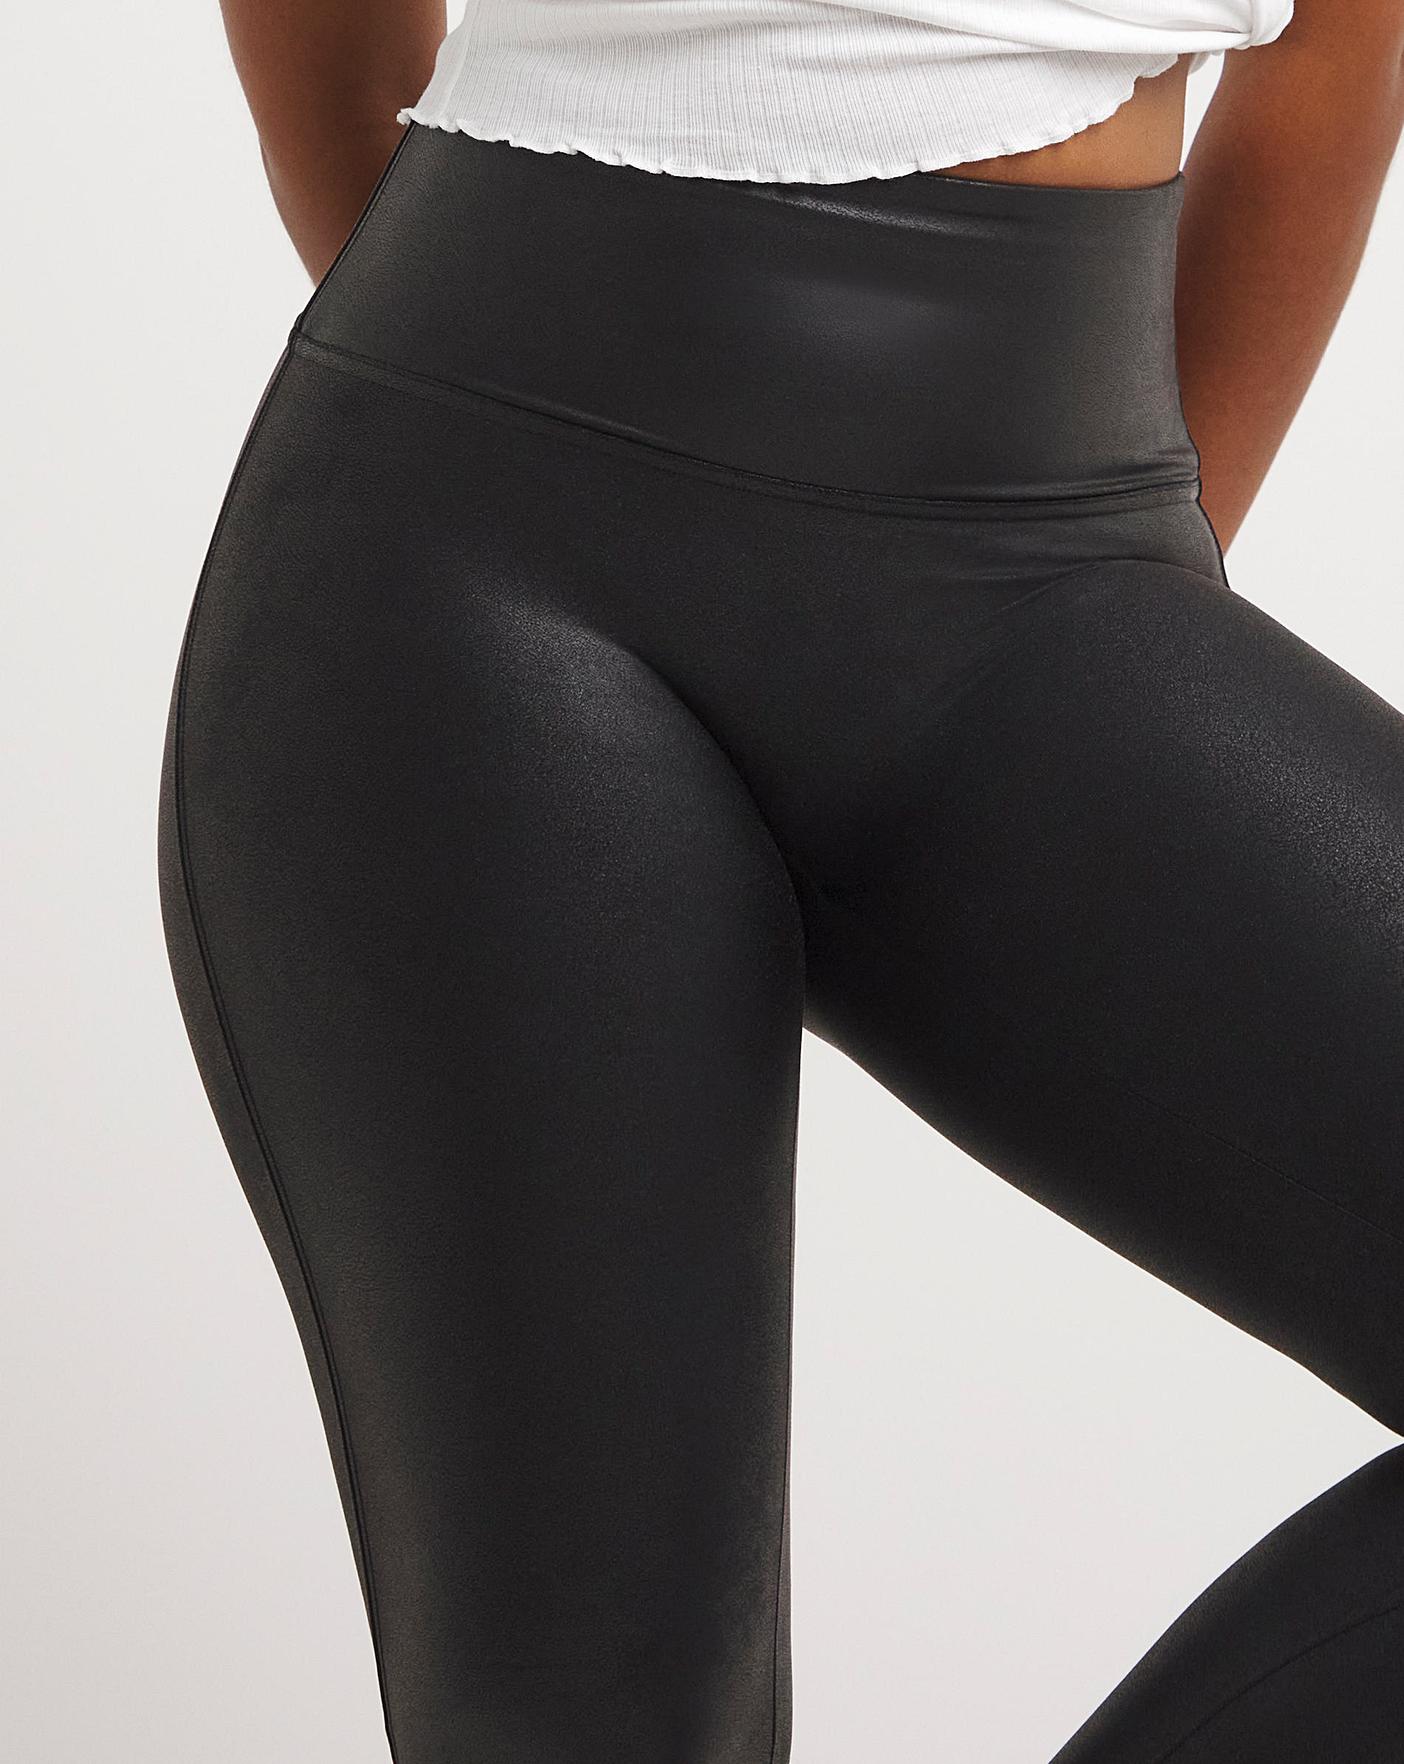 Buy SPANX® Medium Control Black Faux Leather Shaping Leggings from